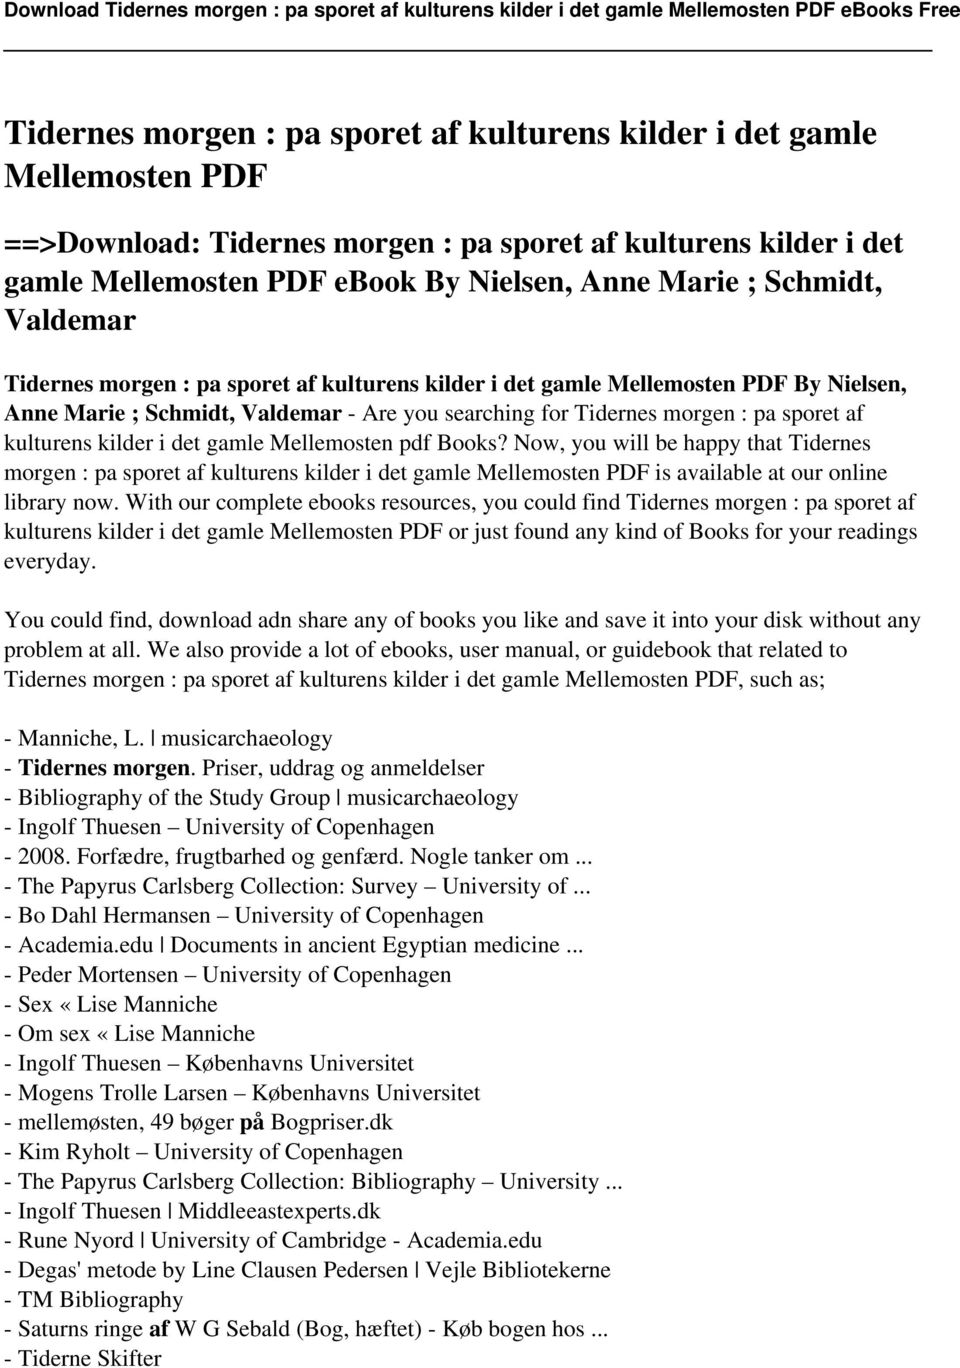 kulturens kilder i det gamle Mellemosten pdf Books? Now, you will be happy that Tidernes morgen : pa sporet af kulturens kilder i det gamle Mellemosten PDF is available at our online library now.